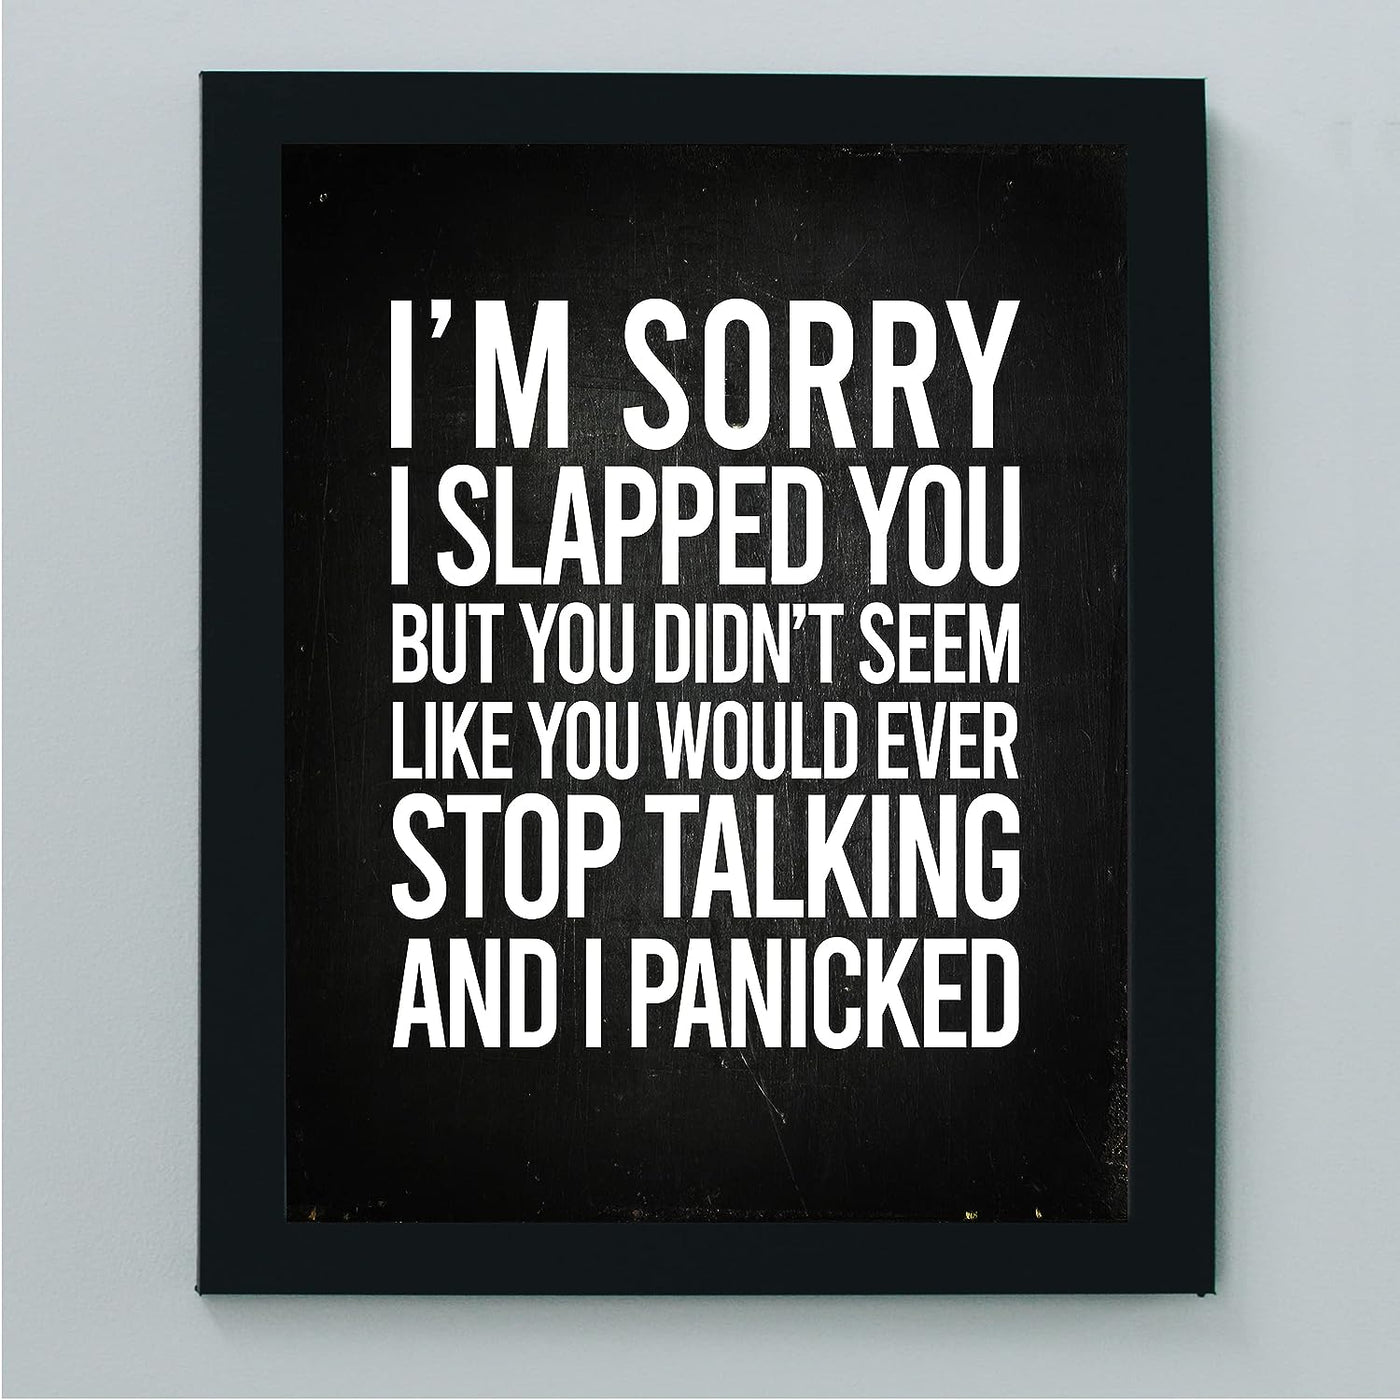 Sorry I Slapped You-Didn't Seem Like You'd Ever Stop Talking Funny Wall Sign -8 x 10" Sarcastic Art Print-Ready to Frame. Humorous Home-Office-Bar-Shop-Cave Decor. Great Desk Sign-Fun Novelty Gift!